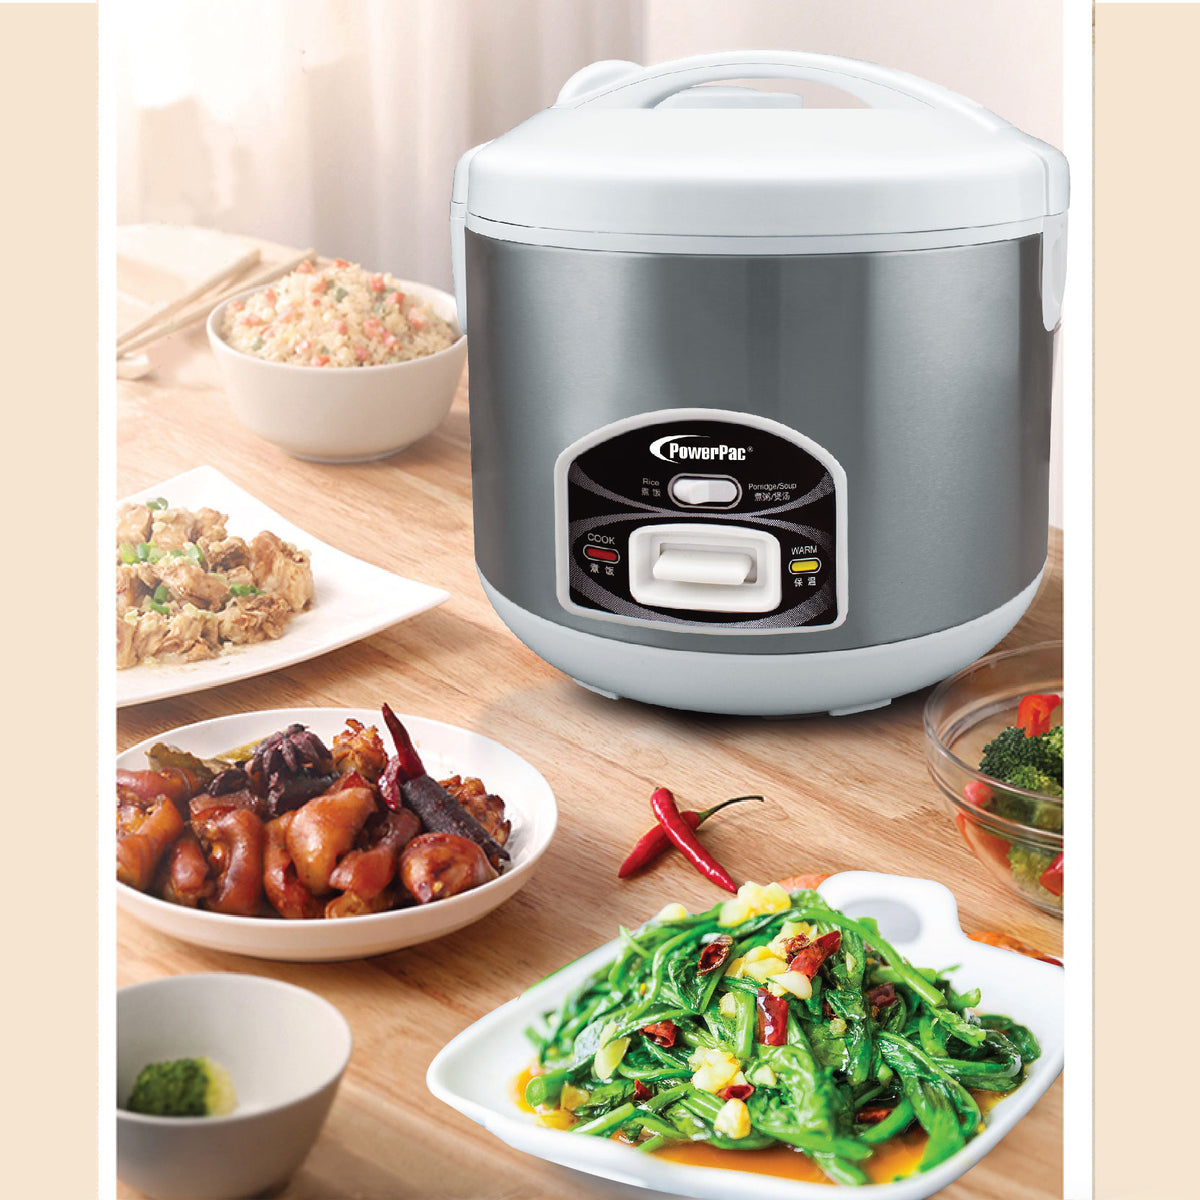 1.8L 3in1 Rice, Porridge Cooker And Steamer (PPRC42) - PowerPacSG